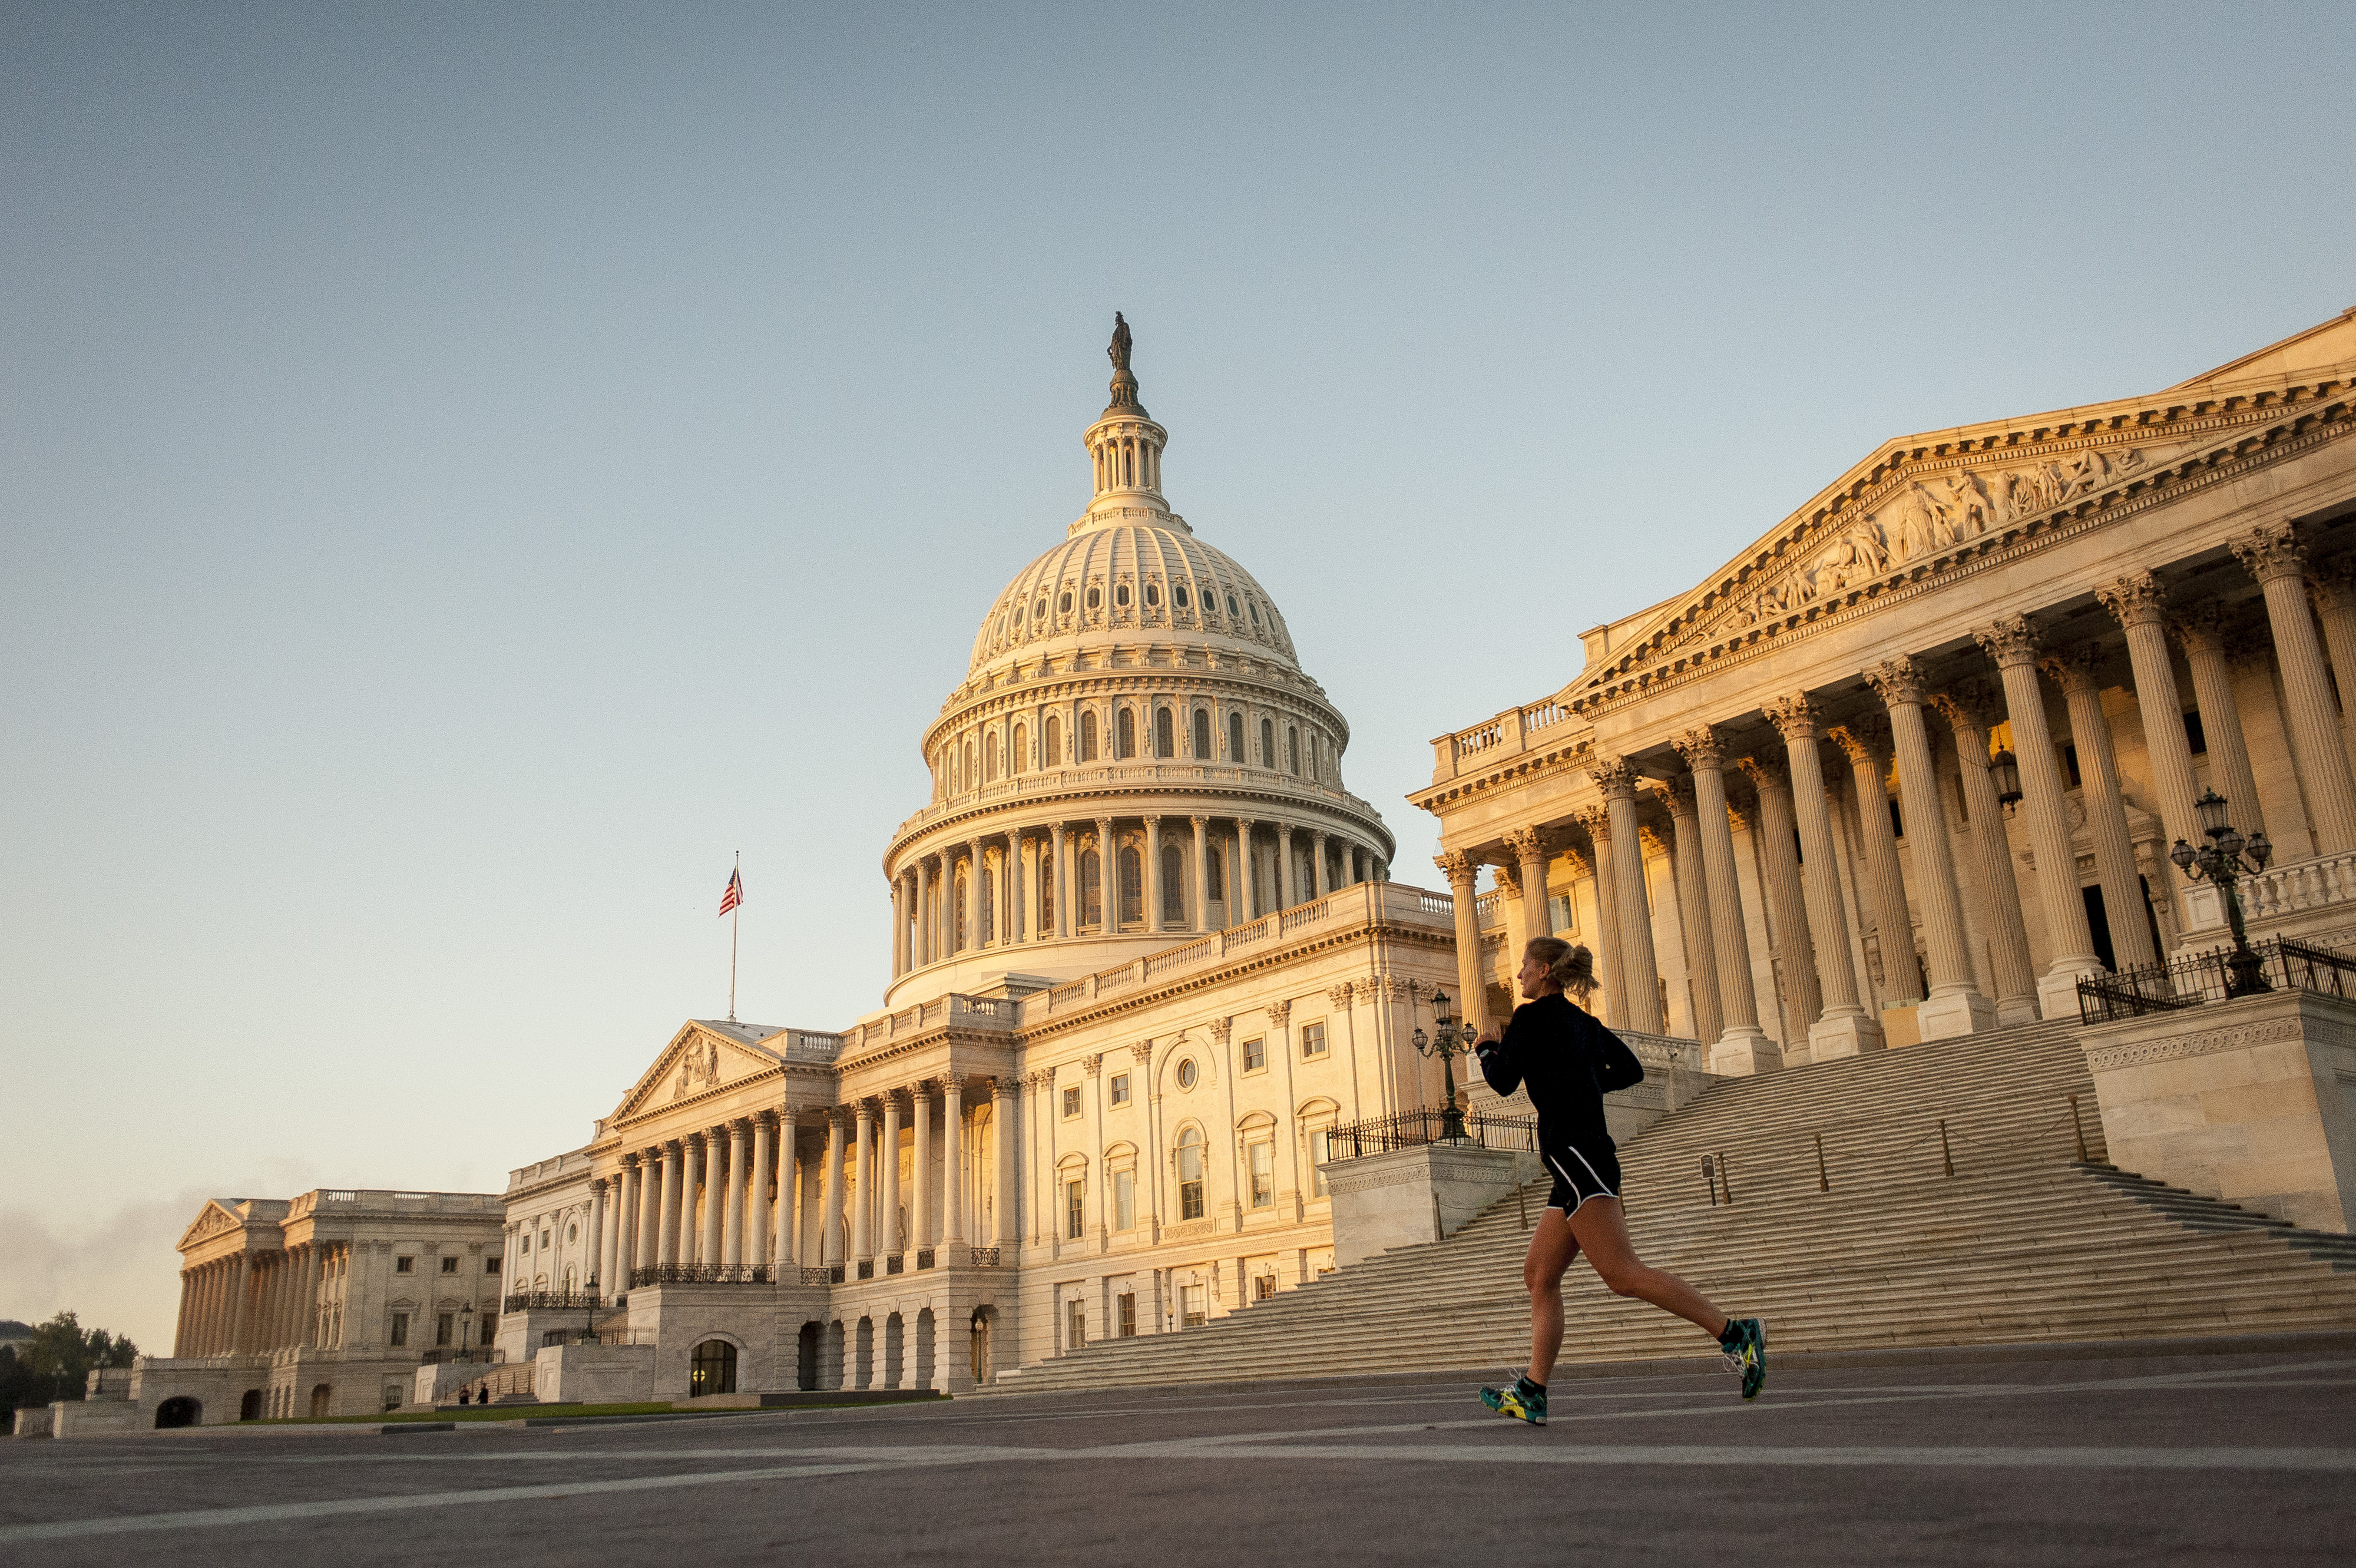 A jogger runs past the United States Capitol building at sunrise in Washington, D.C., U.S., on Tuesday, Oct. 15, 2013.